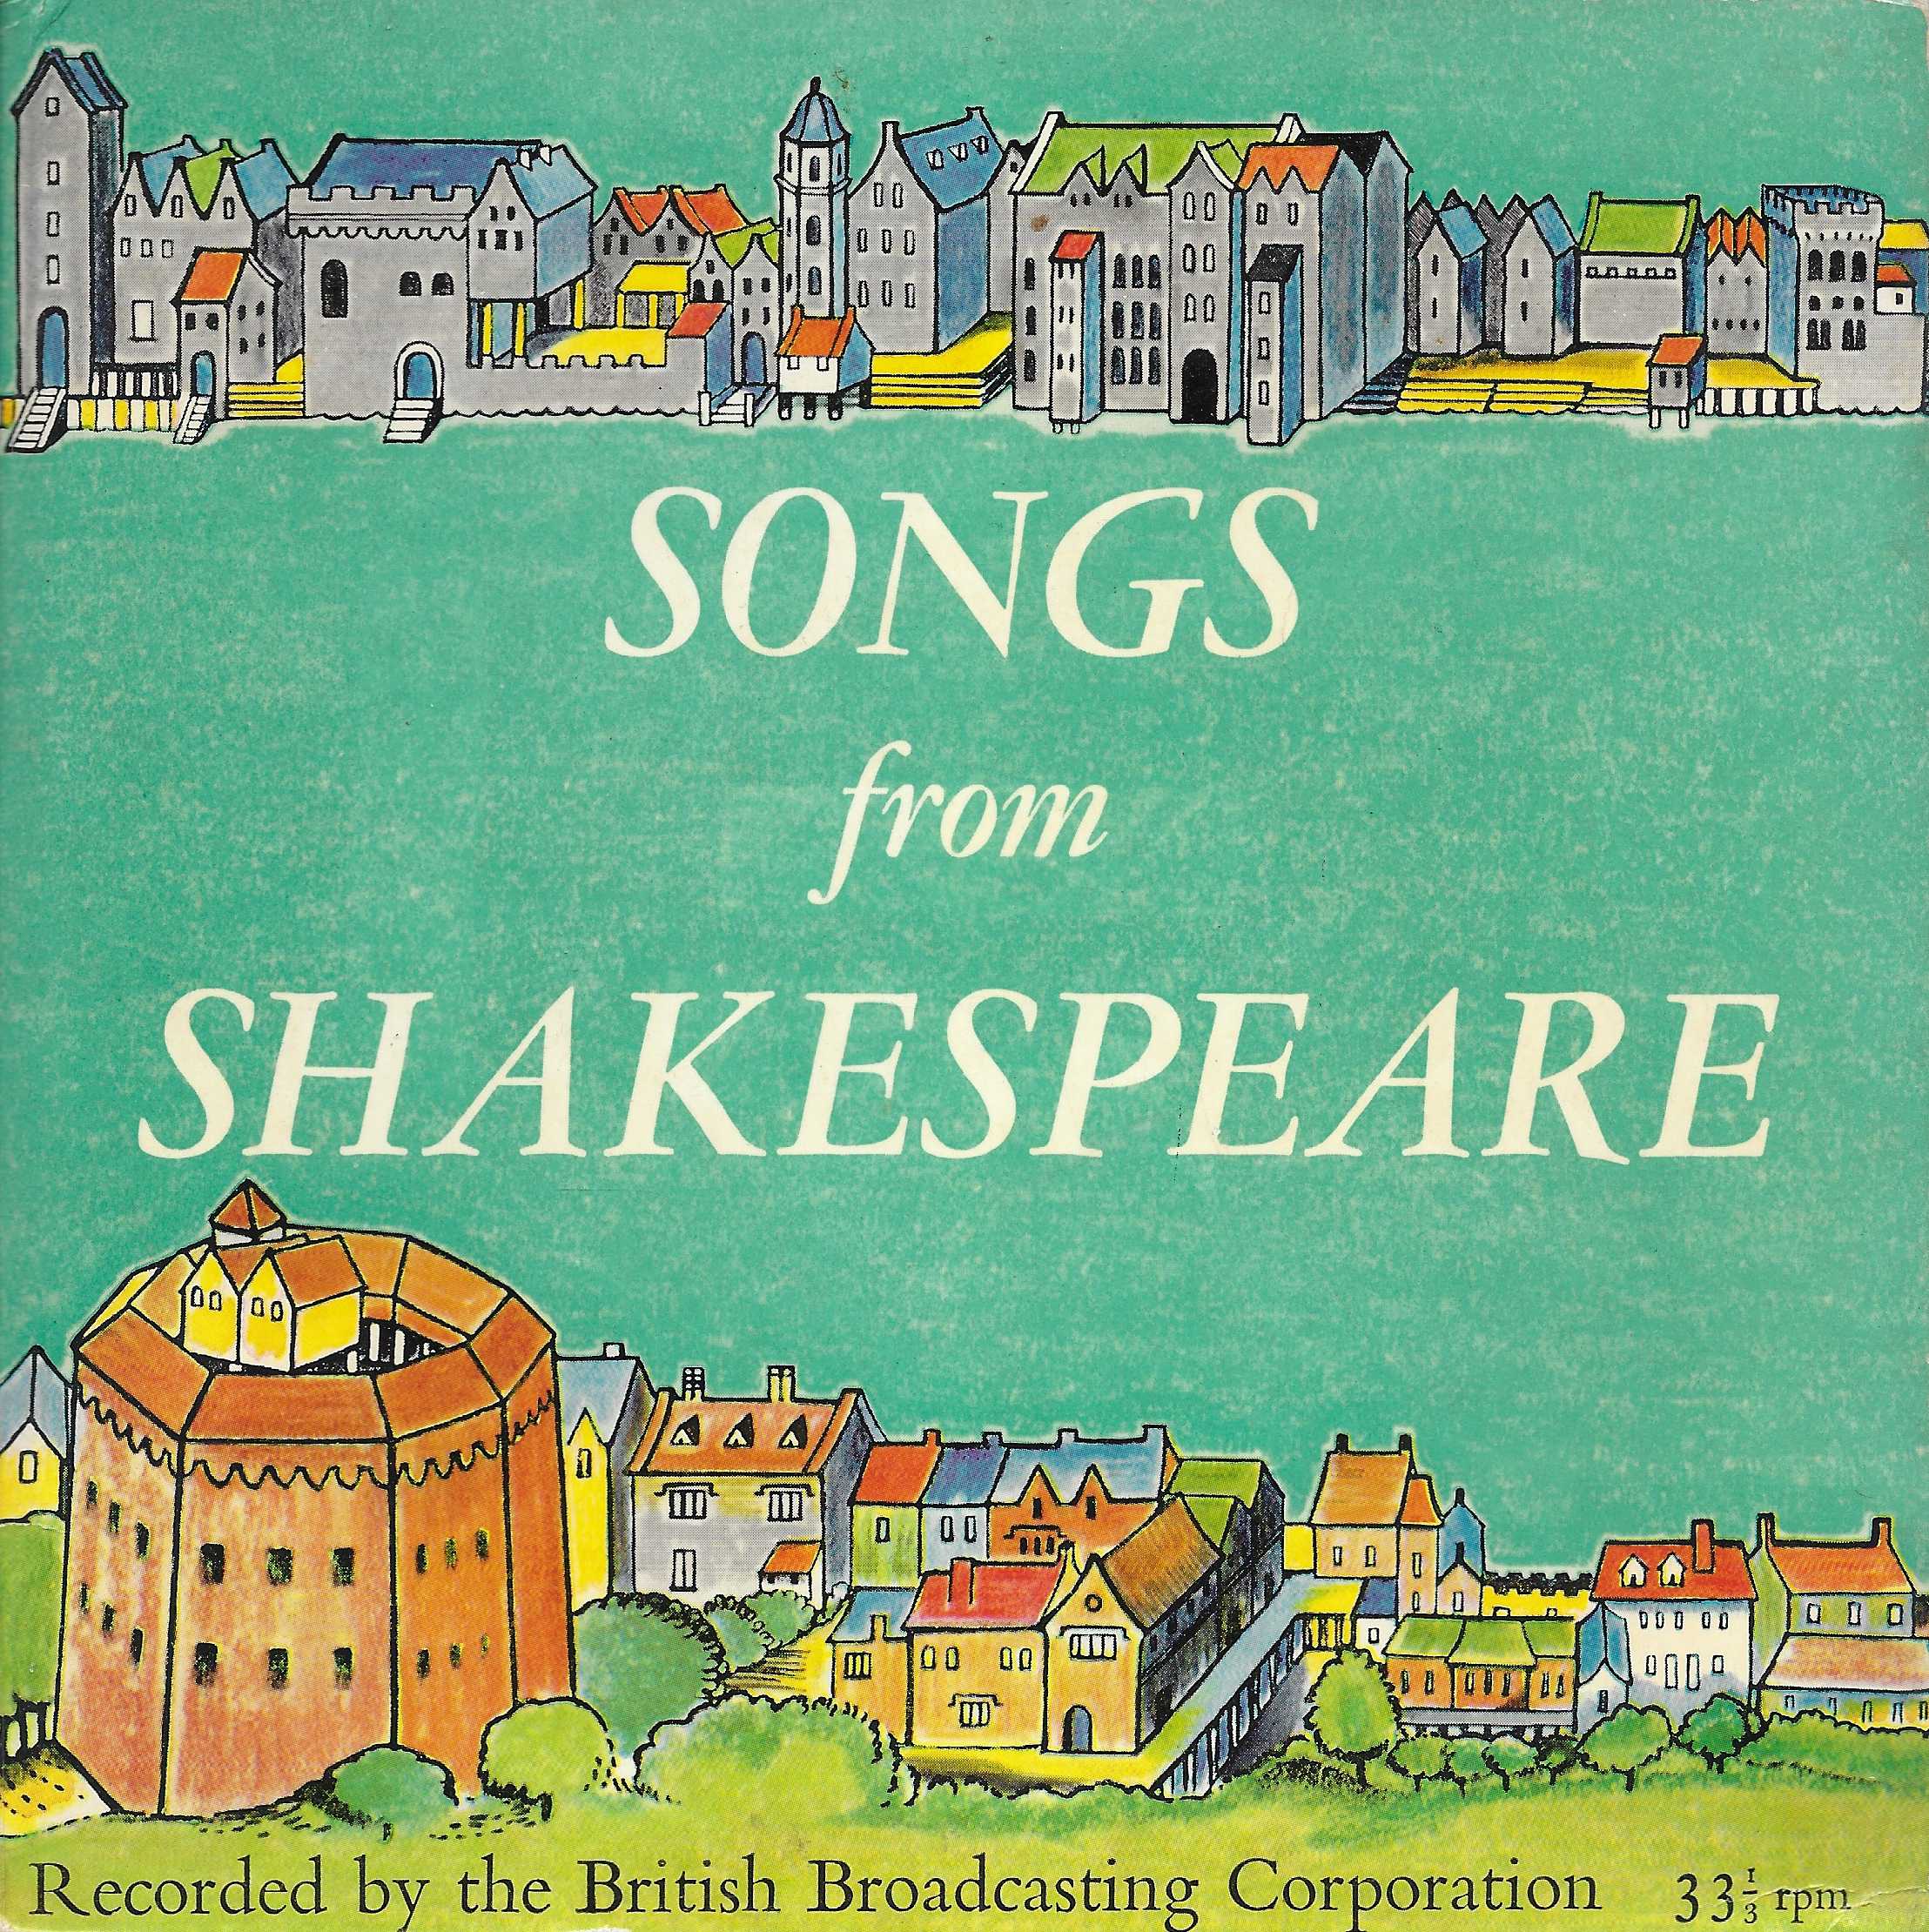 Picture of ETS 5 Songs from Shakespeare - French import by artist Elizabeth Robinson / Philip Todd / Arr. Norman Fraser from the BBC singles - Records and Tapes library